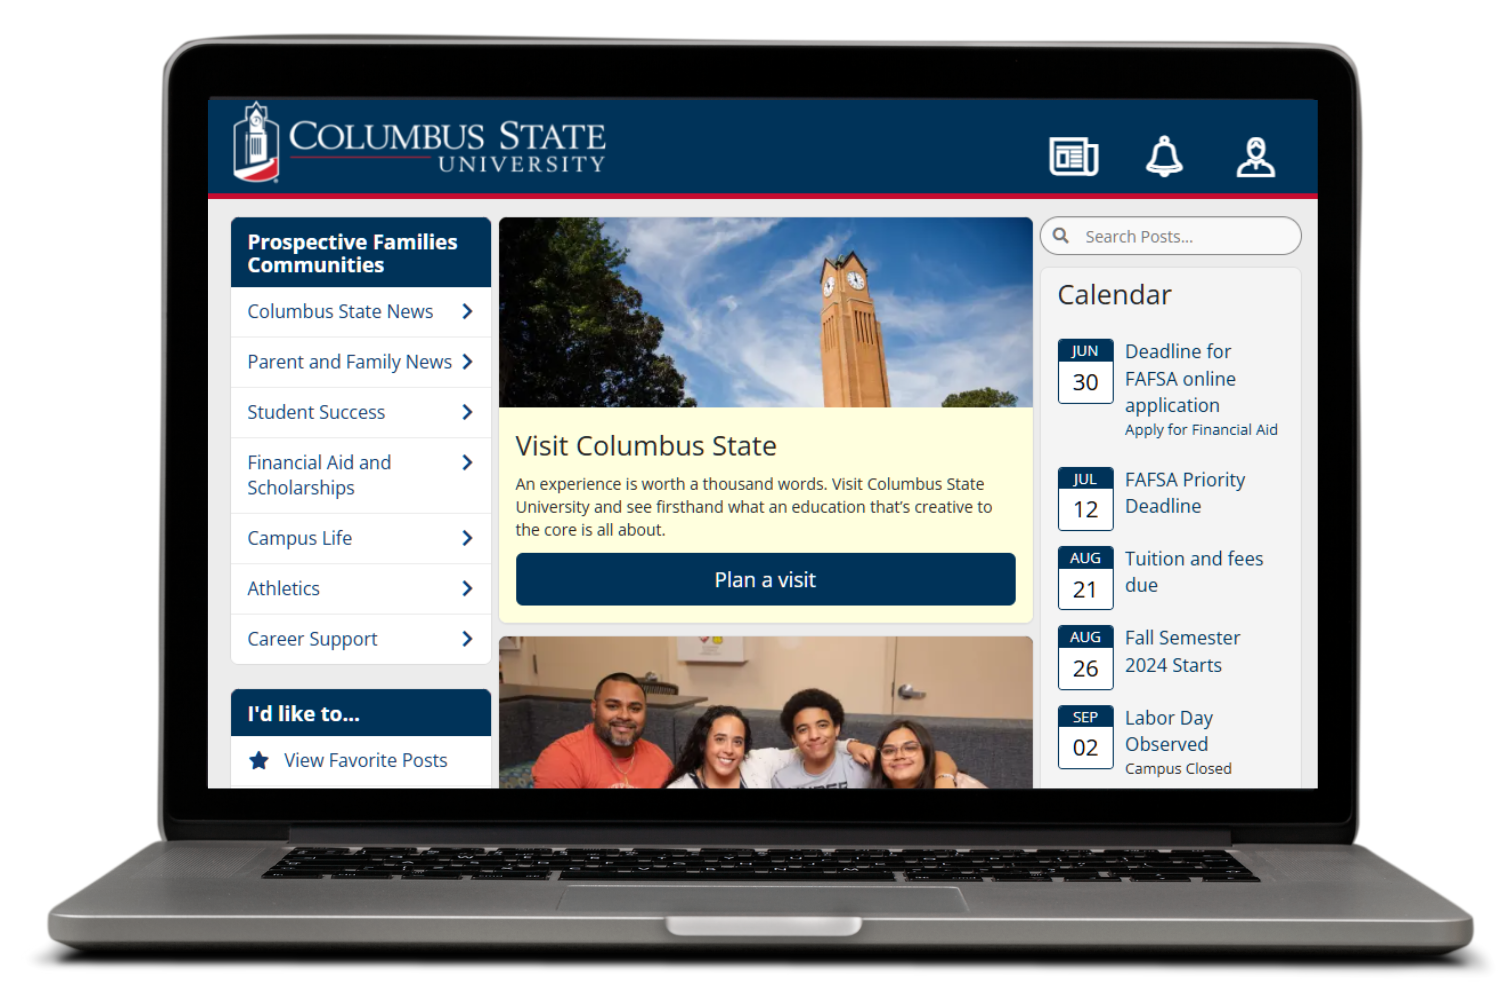 Image of an open laptop displaying a Columbus State website